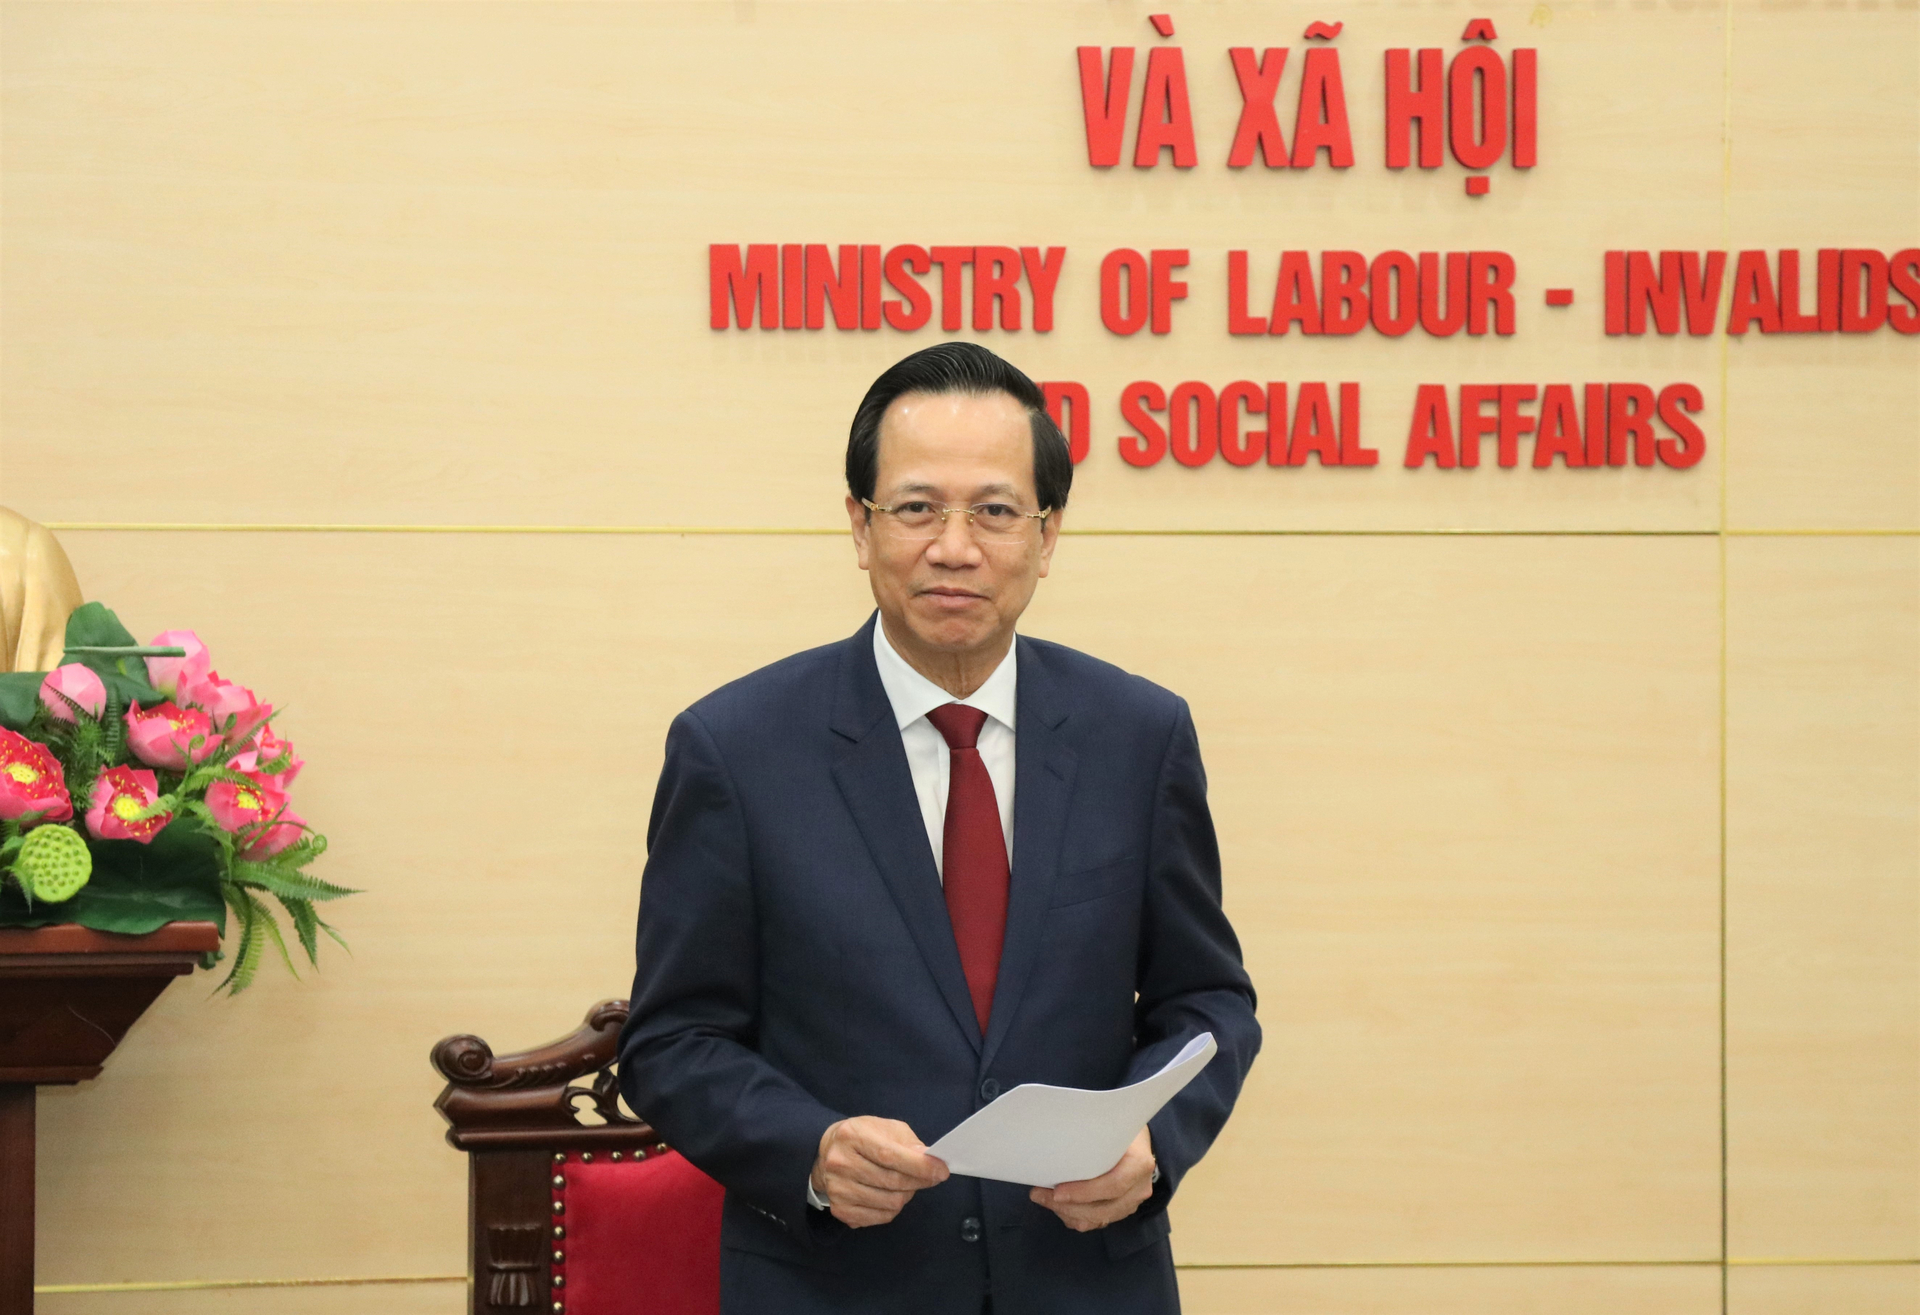 Minister of Labor, Invalids and Social Affairs Dao Ngoc Dung. Photo courtesy of the ministry.